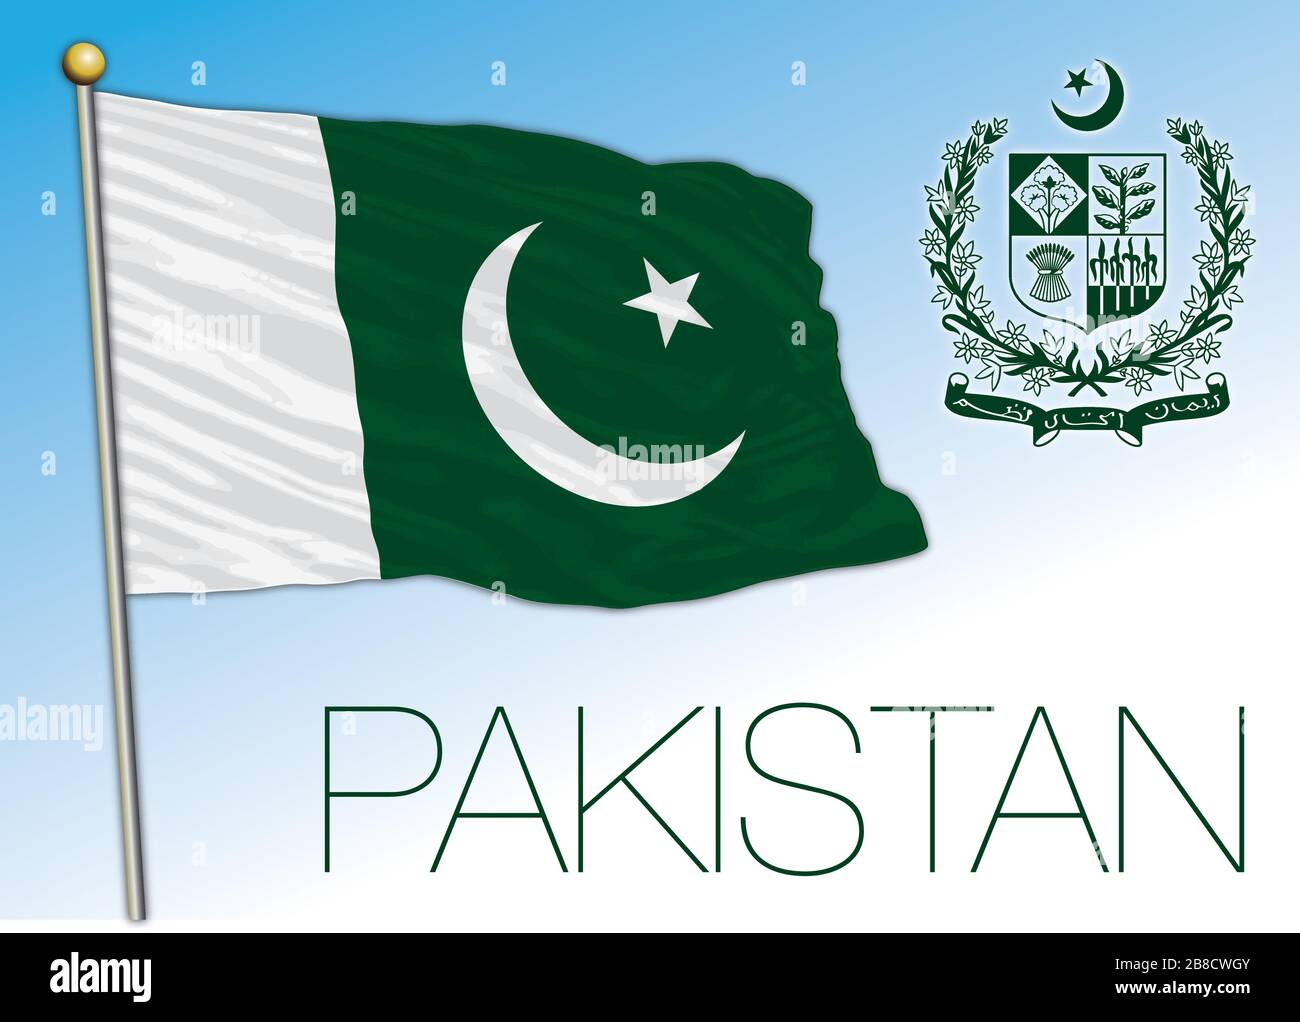 Pakistan official national flag and coat of arms. asiatic country, vector illustration Stock Vector